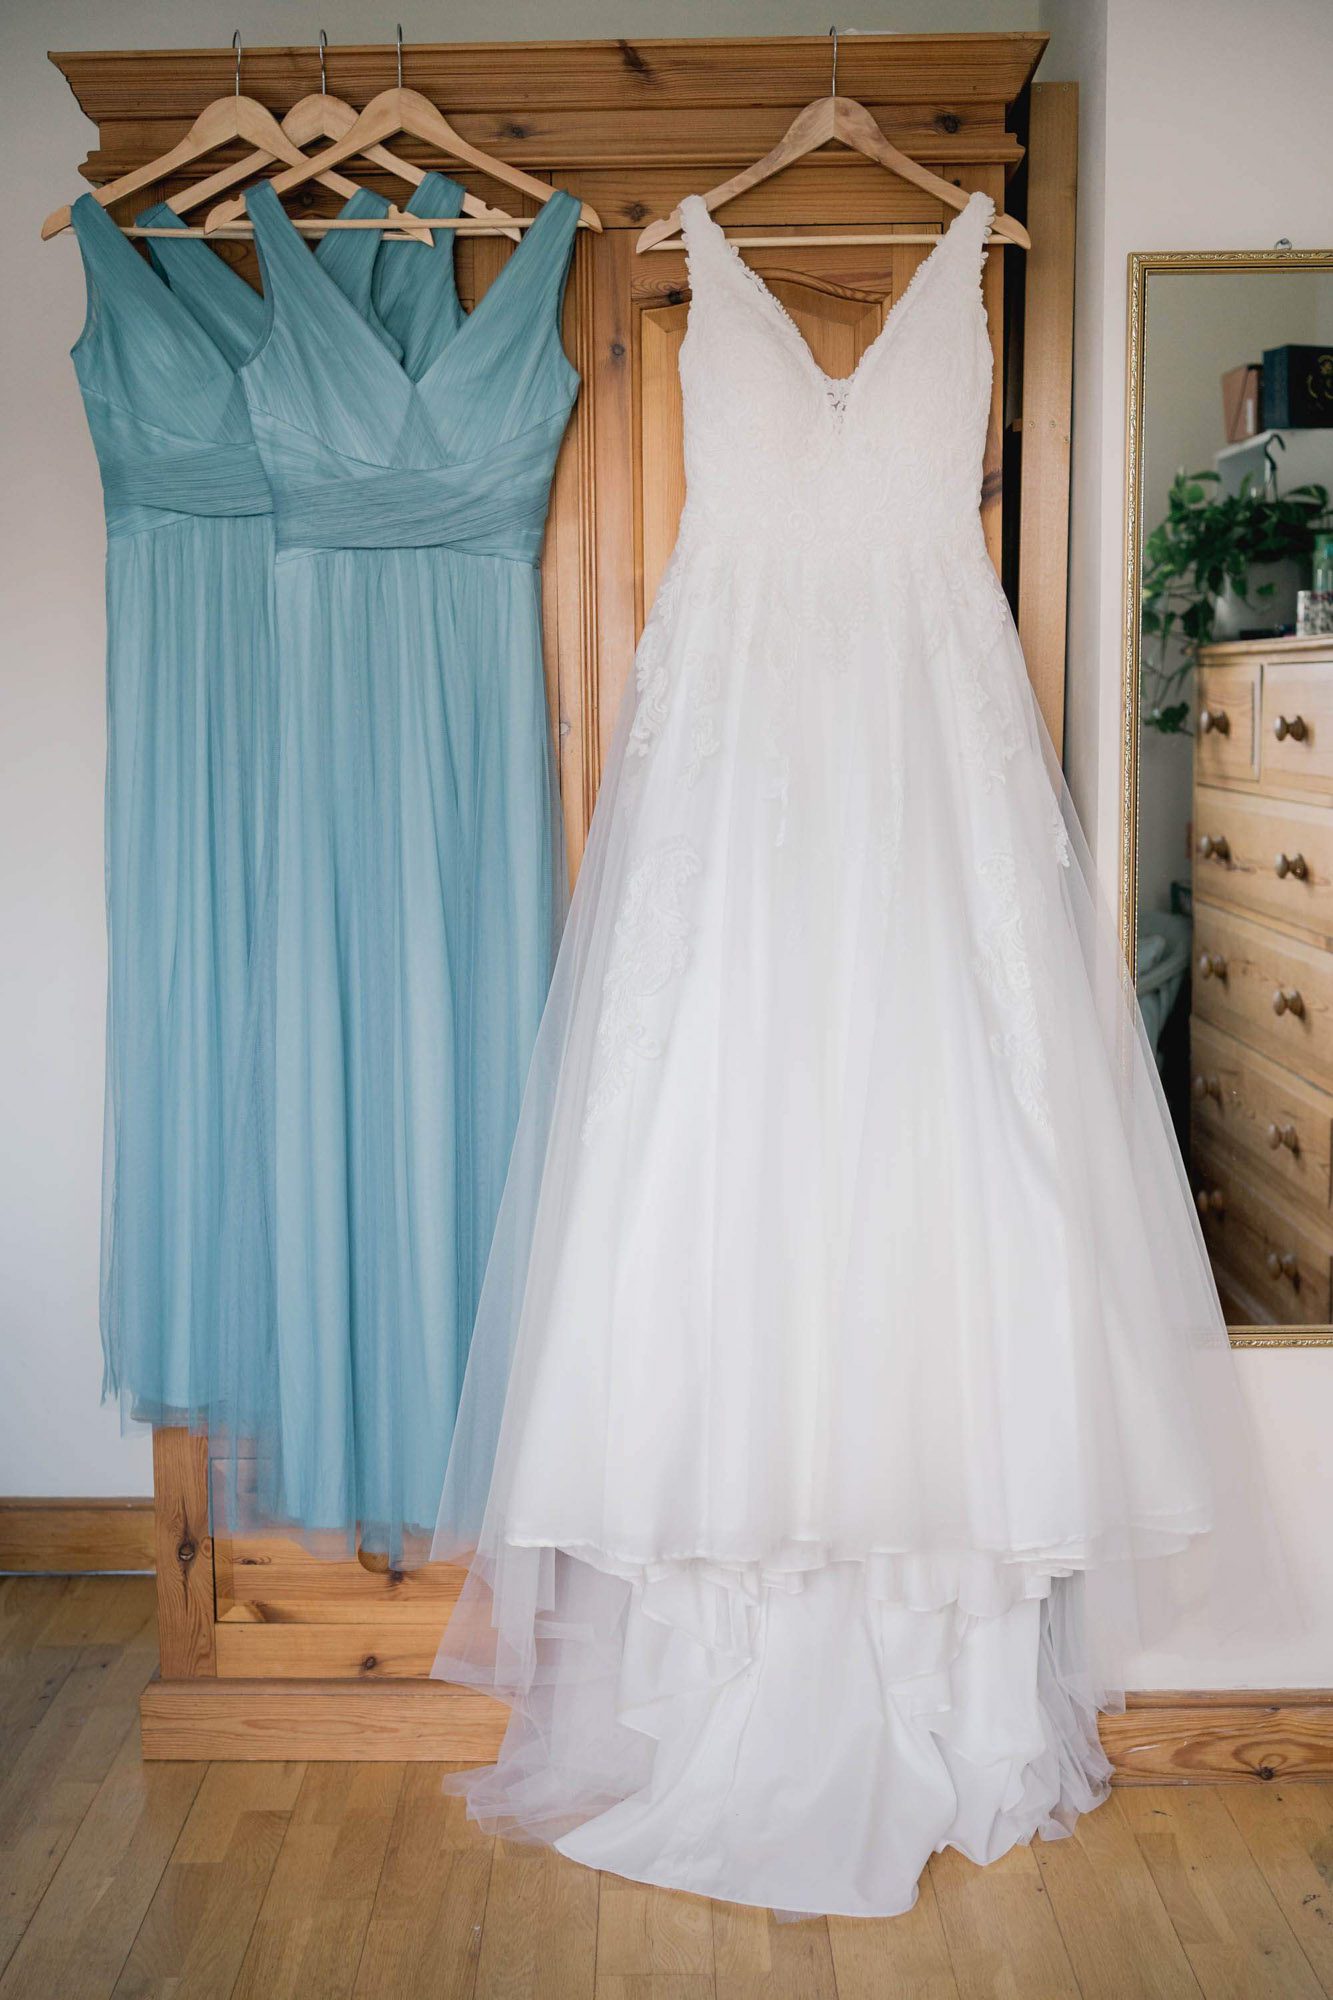 Brides dress hanging up ready for her wedding at Salomons Estate in Tunbridge Wells.